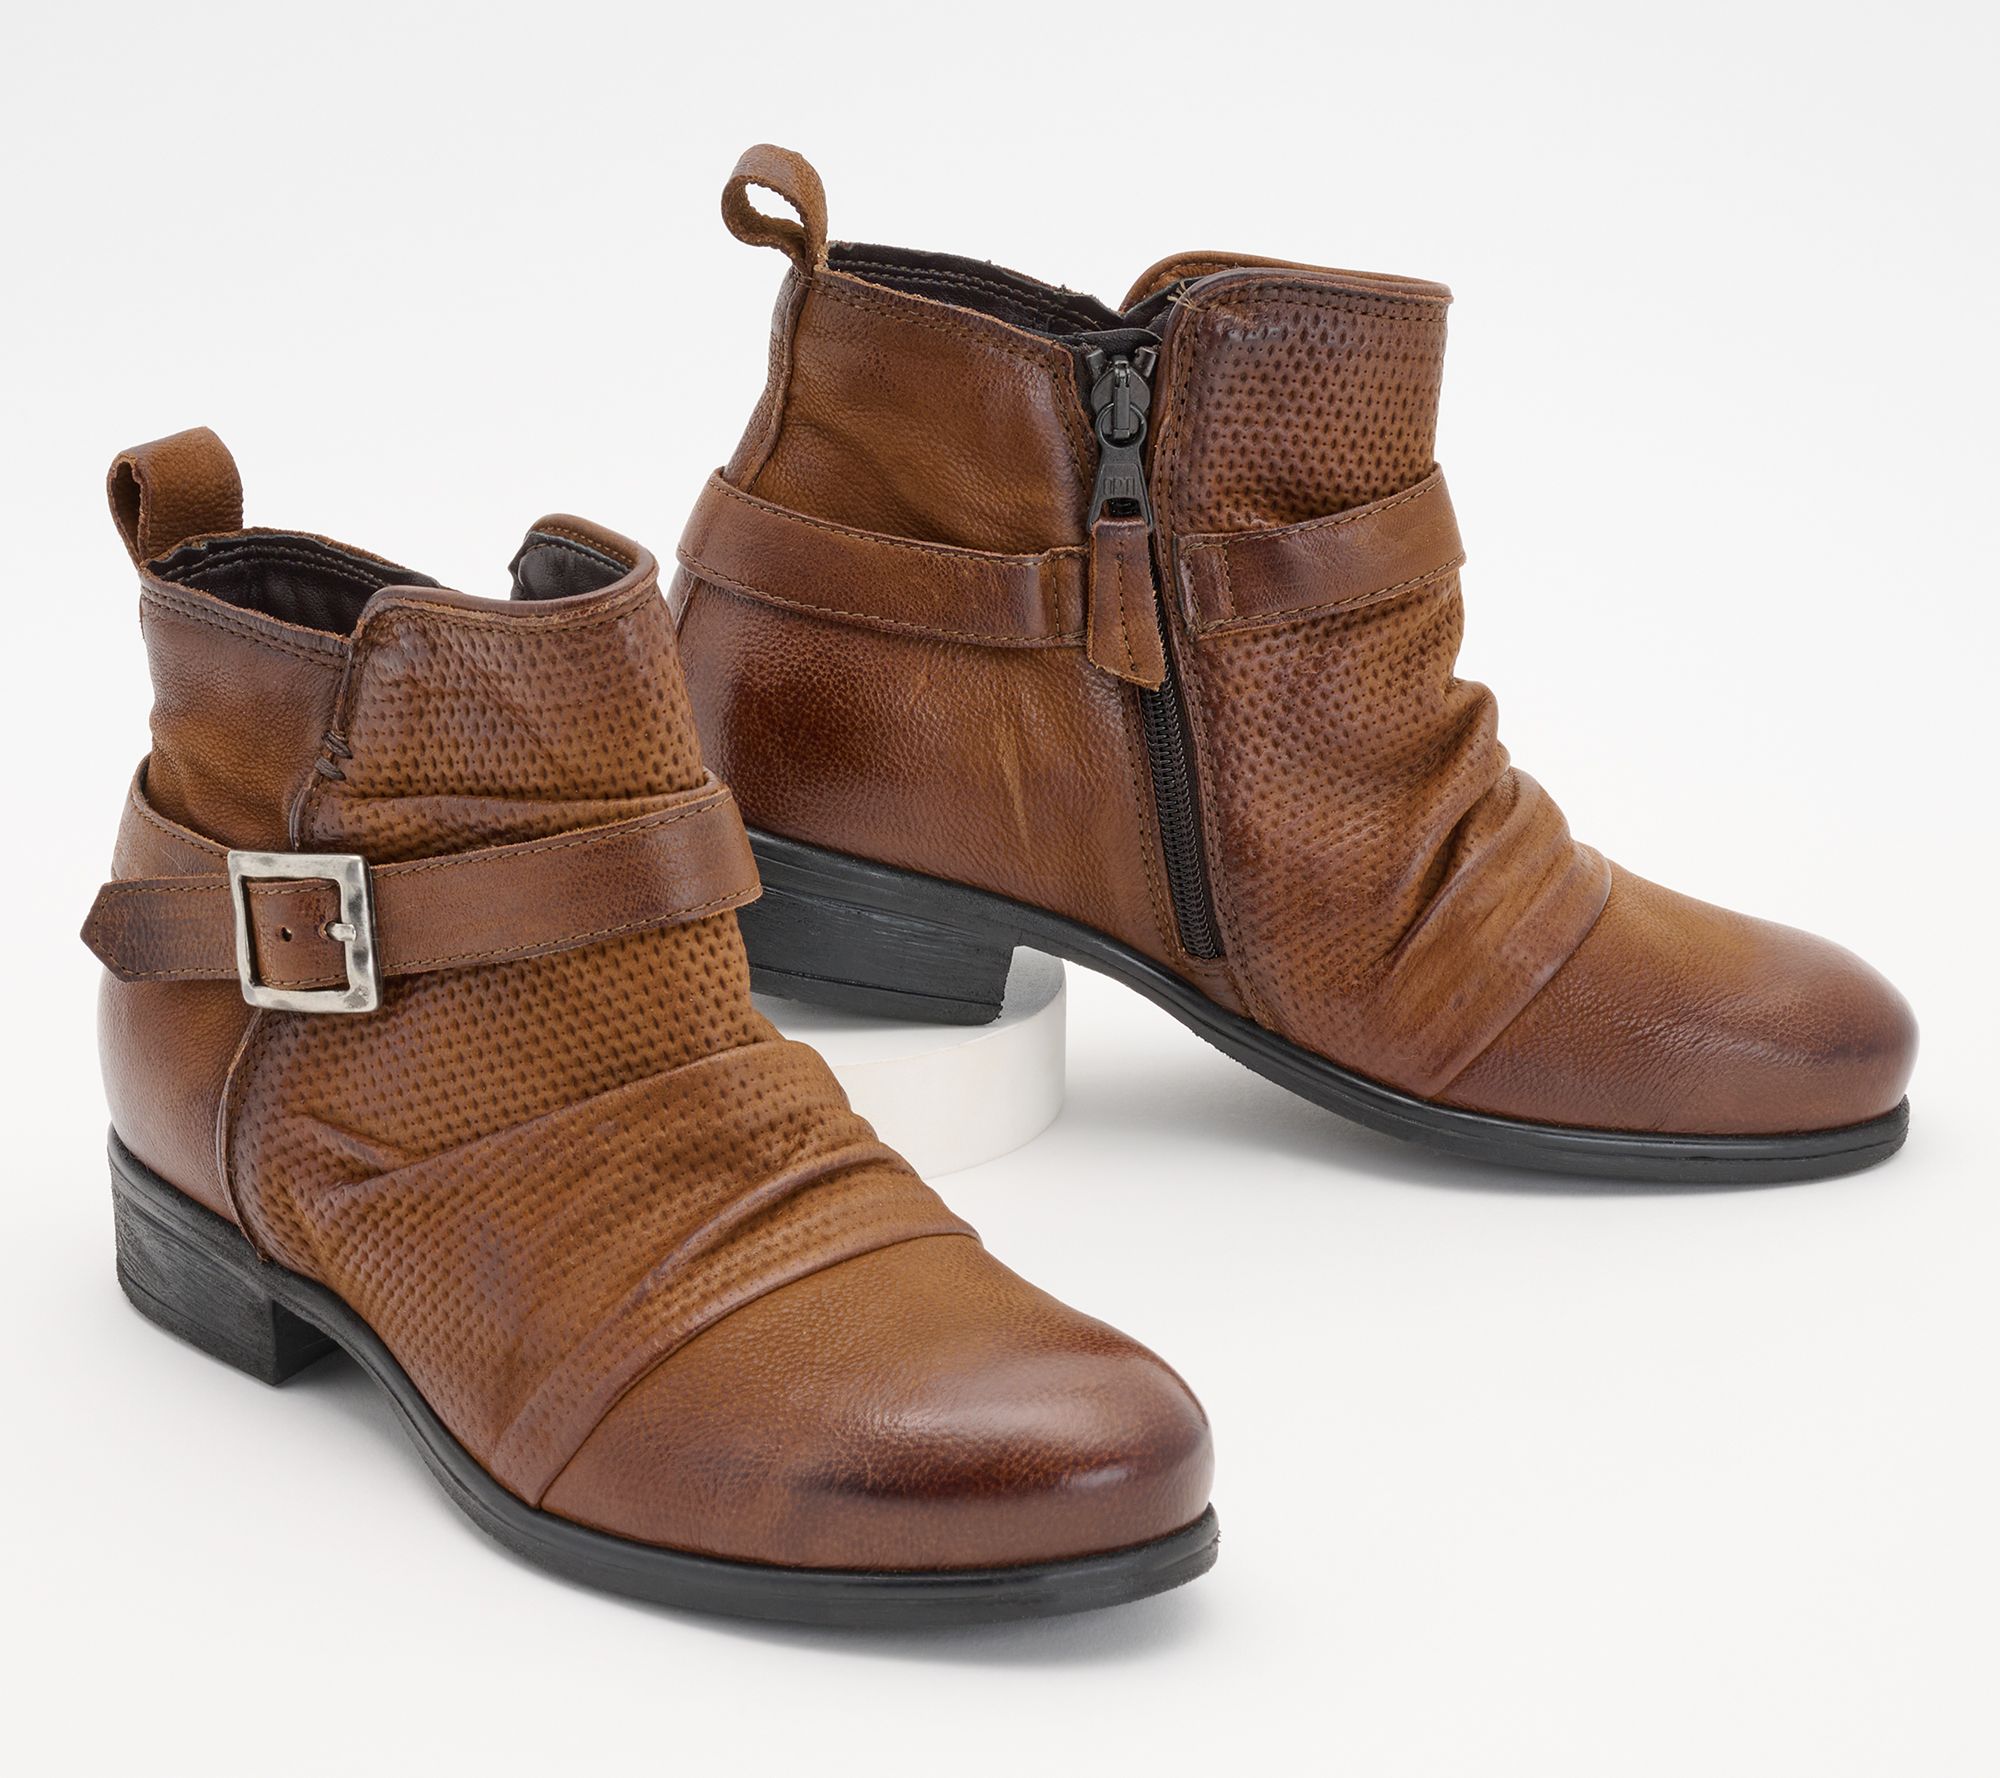 Miz Mooz Leather Ankle Boots with Buckle - Suzy - QVC.com